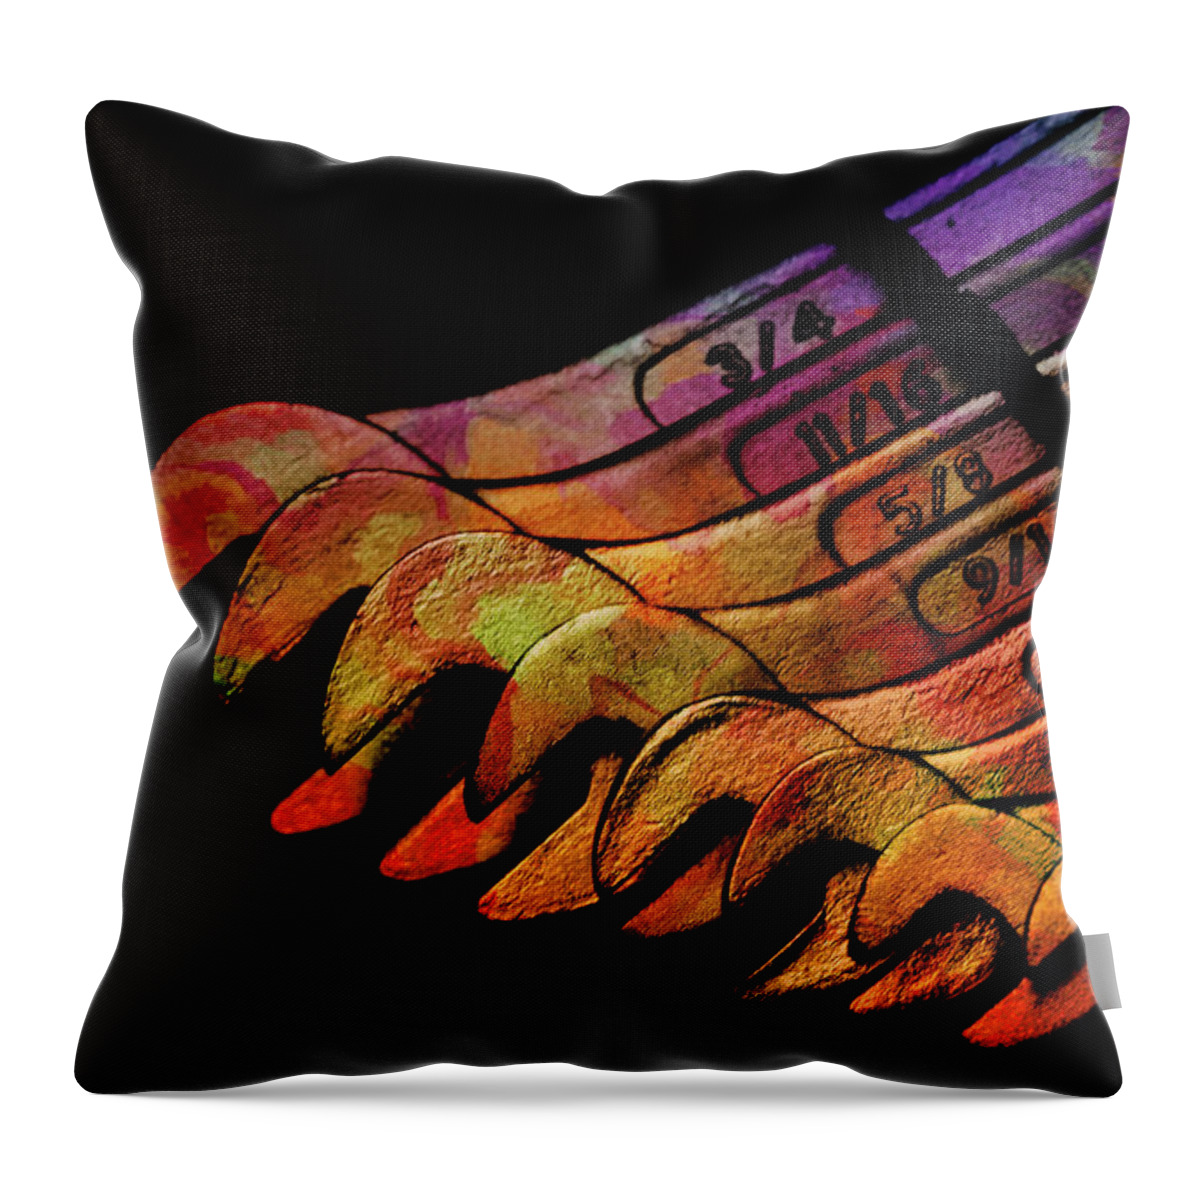 Spanners Photography Throw Pillow featuring the photograph Spanners 01 by Kevin Chippindall